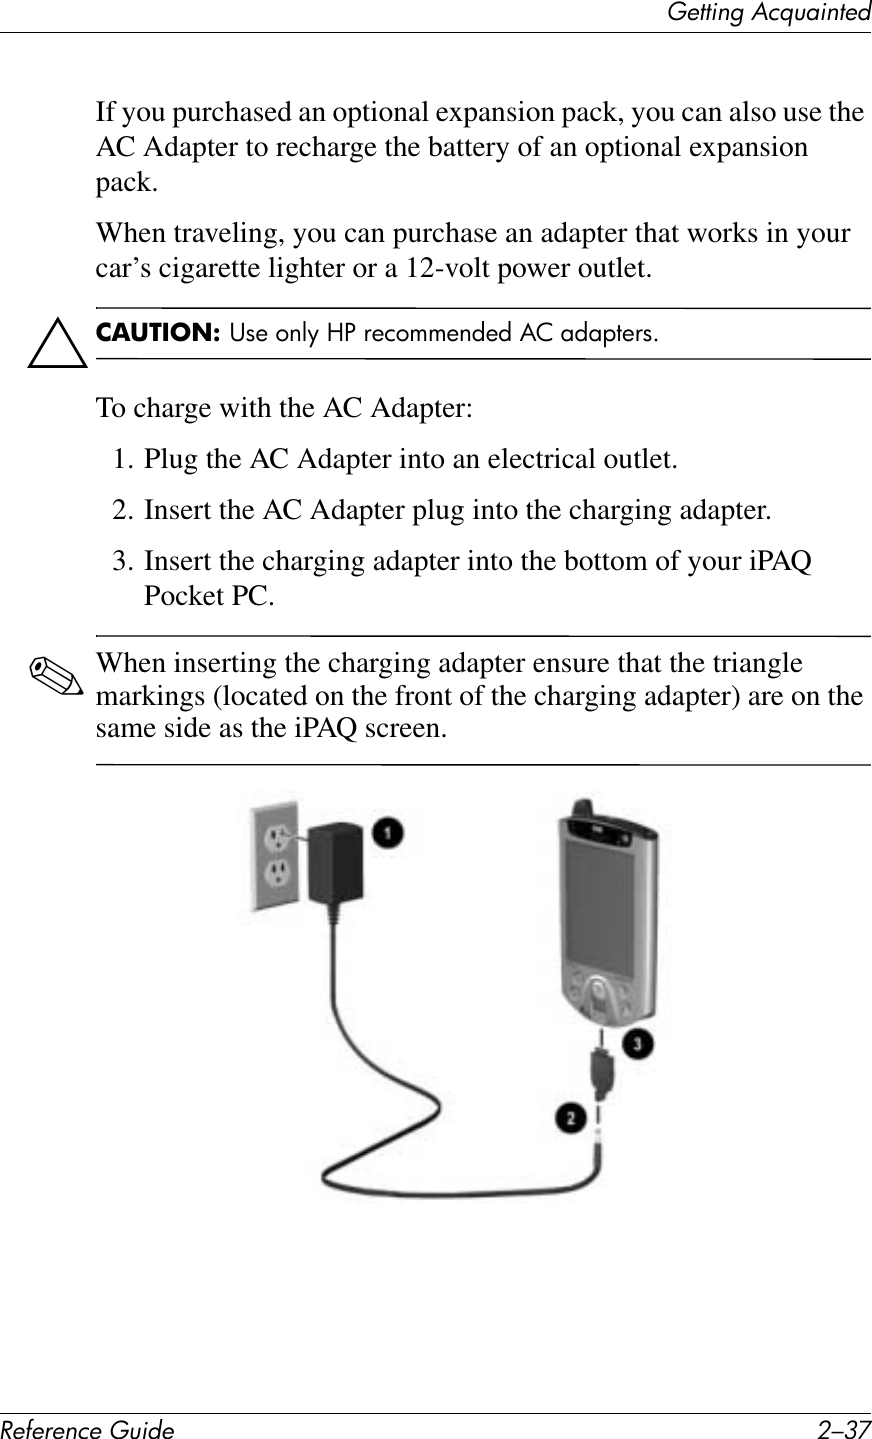 (&quot;11*%2&apos;&lt;&amp;T)4*%1&quot;+!&quot;#&quot;$&quot;%&amp;&quot;&apos;()*+&quot; 0/9FIf you purchased an optional expansion pack, you can also use the AC Adapter to recharge the battery of an optional expansion pack.When traveling, you can purchase an adapter that works in your car’s cigarette lighter or a 12-volt power outlet.Ä2,34/5.1&amp;R1+#(6DF#M%#2+)(55+6C+C#&amp;-#7C7&quot;,+21GTo charge with the AC Adapter:1. Plug the AC Adapter into an electrical outlet.2. Insert the AC Adapter plug into the charging adapter.3. Insert the charging adapter into the bottom of your iPAQ Pocket PC.✎When inserting the charging adapter ensure that the triangle markings (located on the front of the charging adapter) are on the same side as the iPAQ screen.